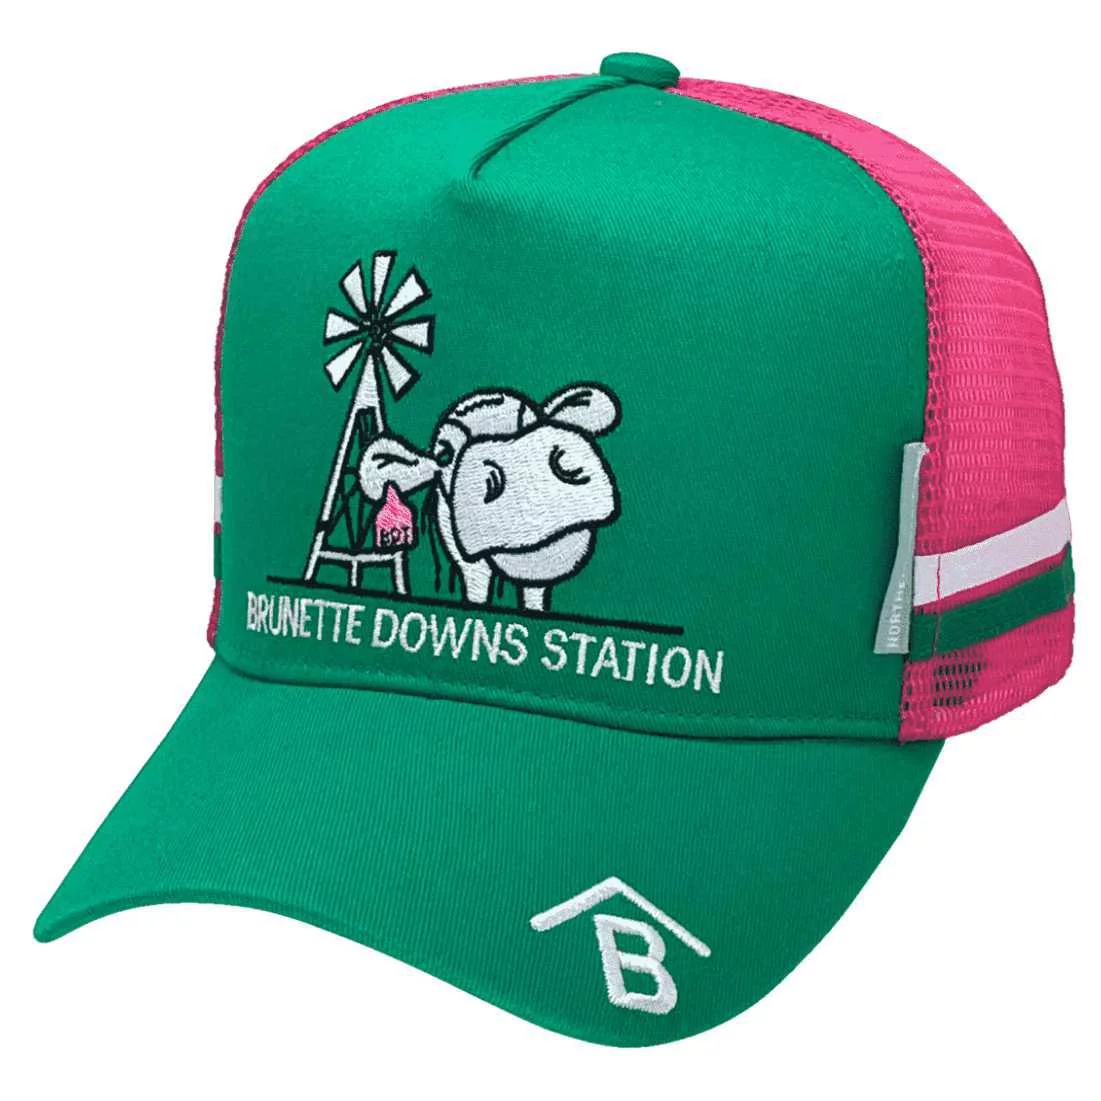 Brunette Downs Station AACo Barkley Tablelands Qld HP Midrange Aussie Trucker Hat with Australian Head Fit Crown and 2 Side Bands Green Hot Pink White